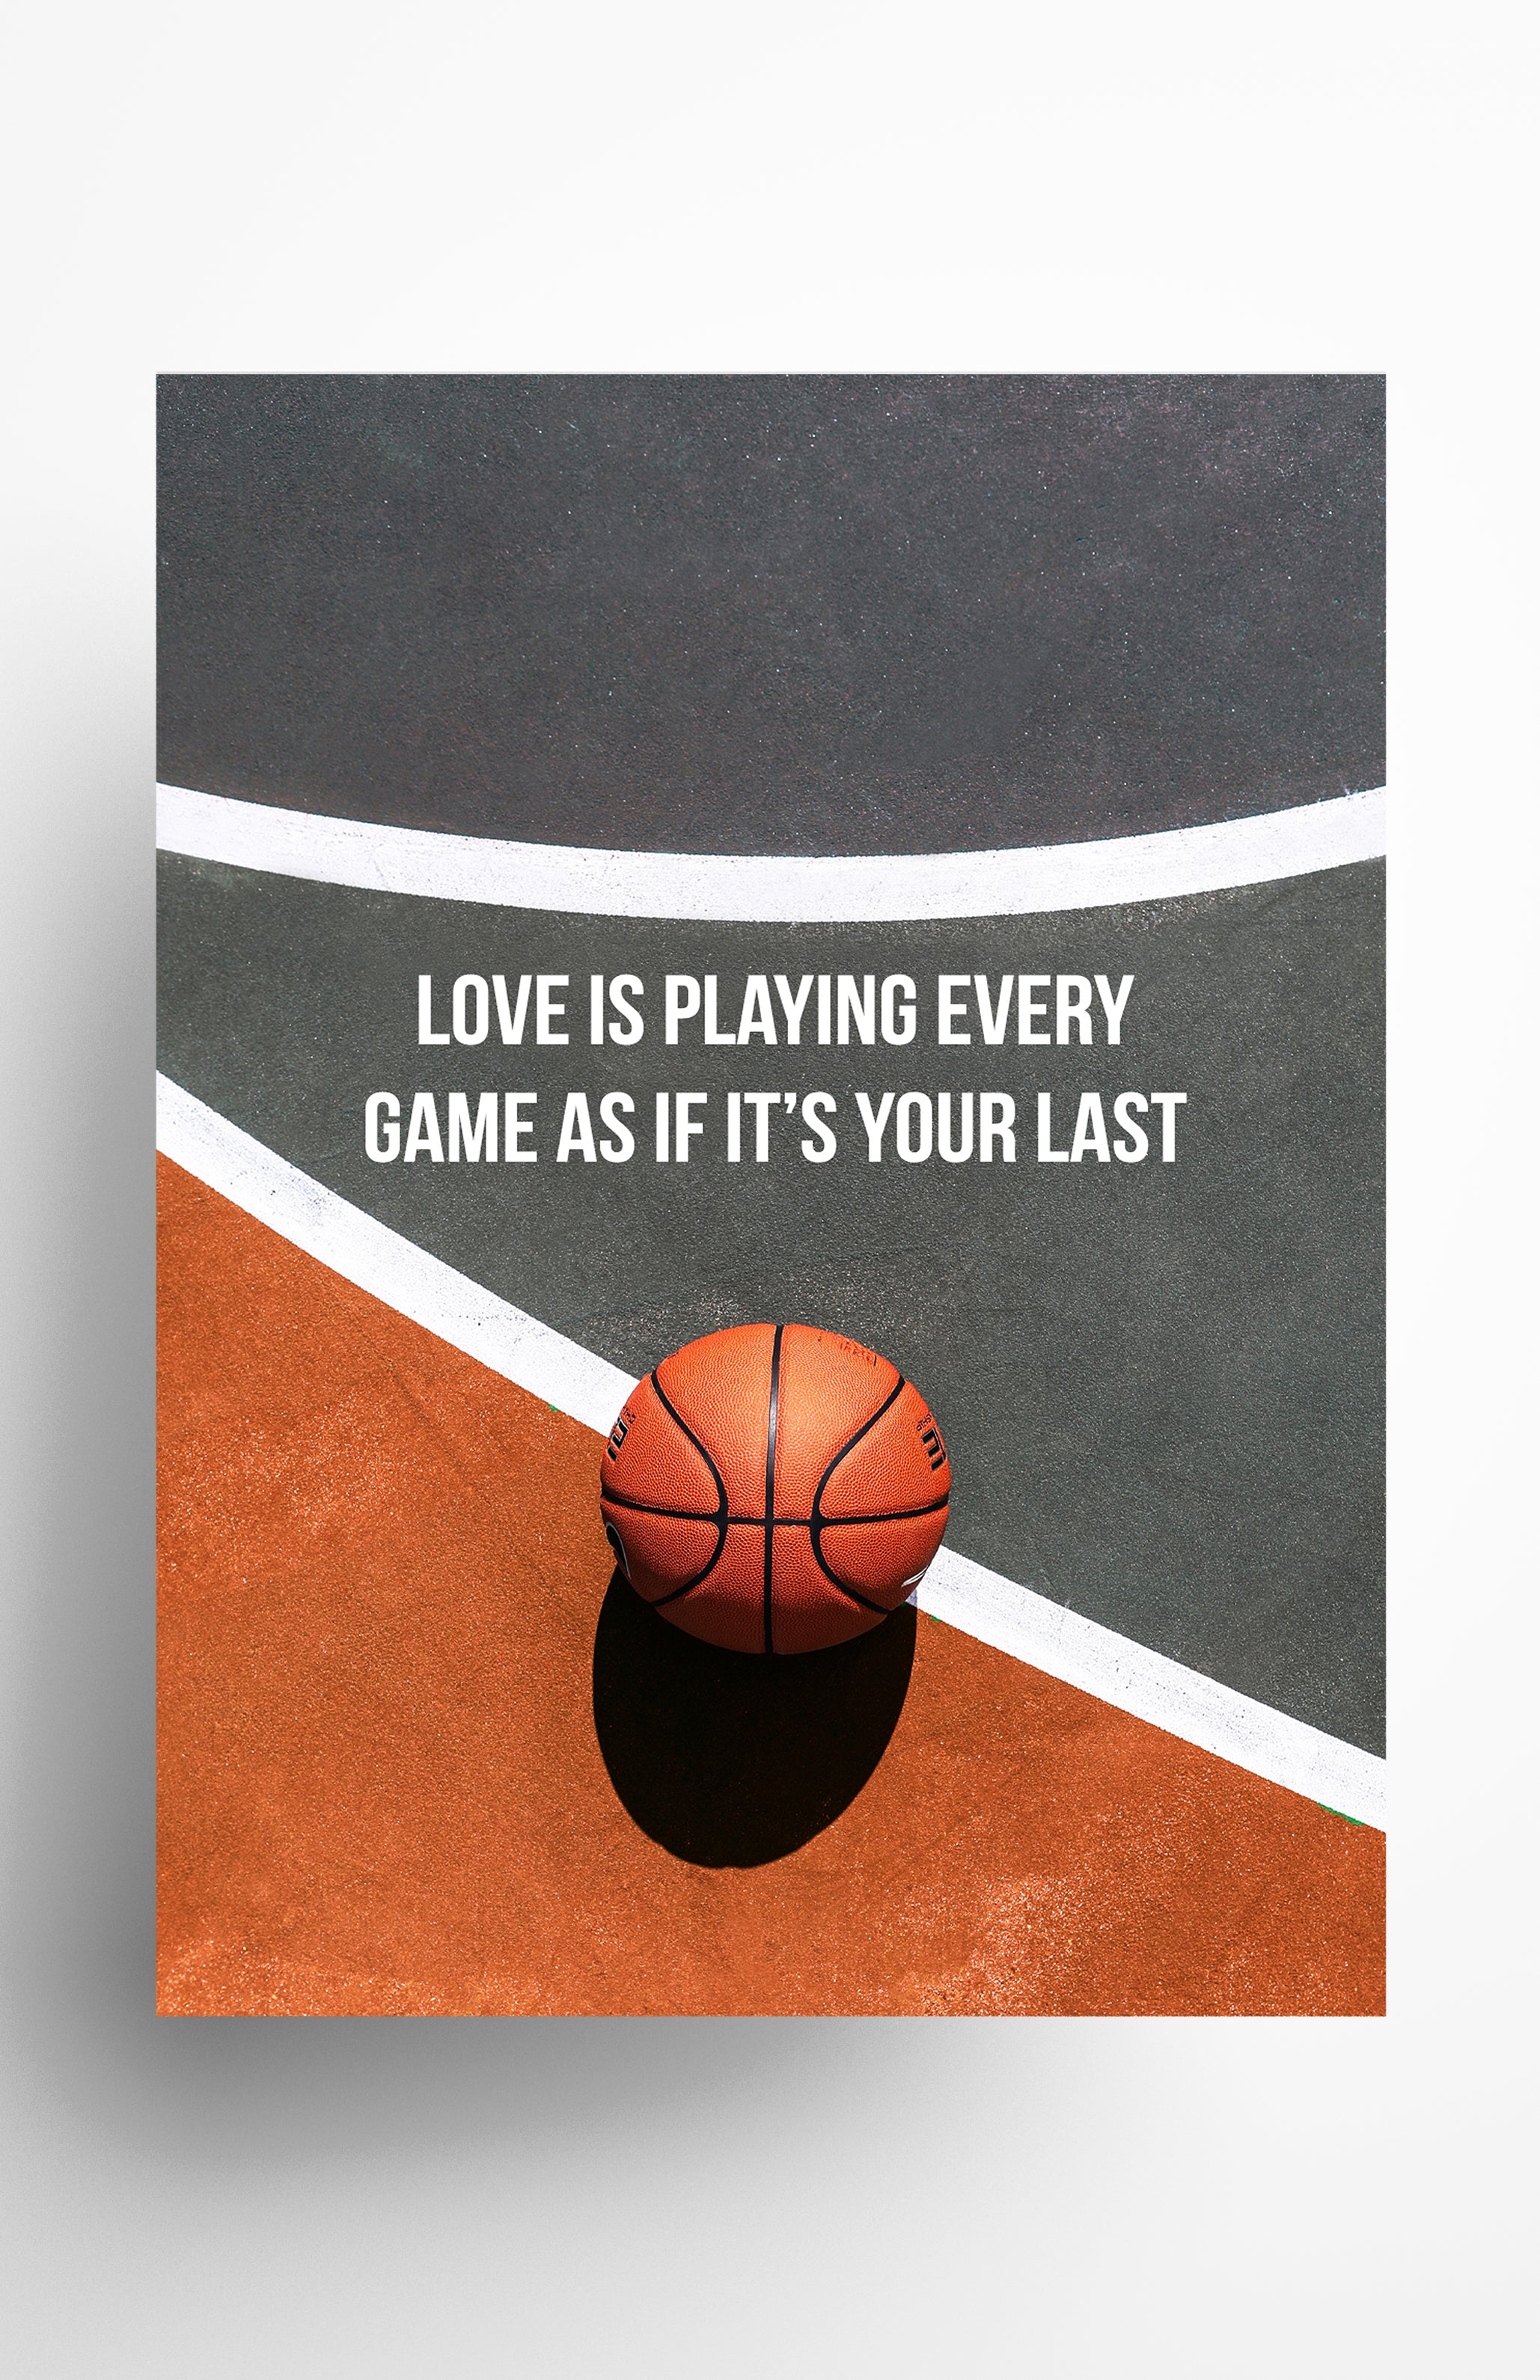 V3 Apparel womens Love Is Playing Every Game As If It's Your Last, Motivational posters, mens inspirational wall artwork and empowering poster quote designs for office, home gym, school, kitchen and living room.